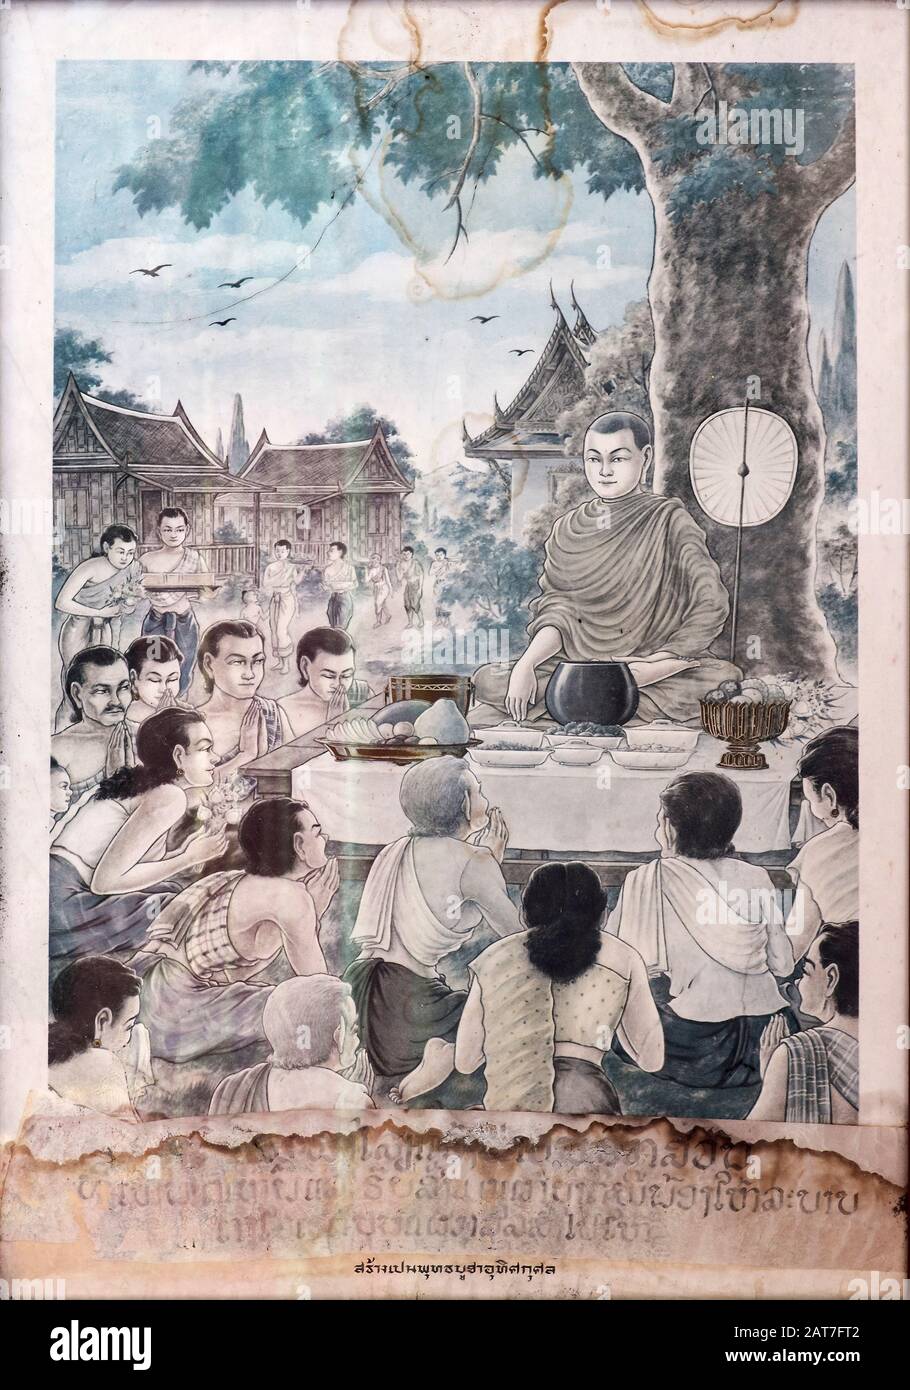 Drawing from the book Phra Malaya entitled Making merit by offering food to a monk, Temple Wat Sen Soukharam, Luang Prabang, Laos Stock Photo